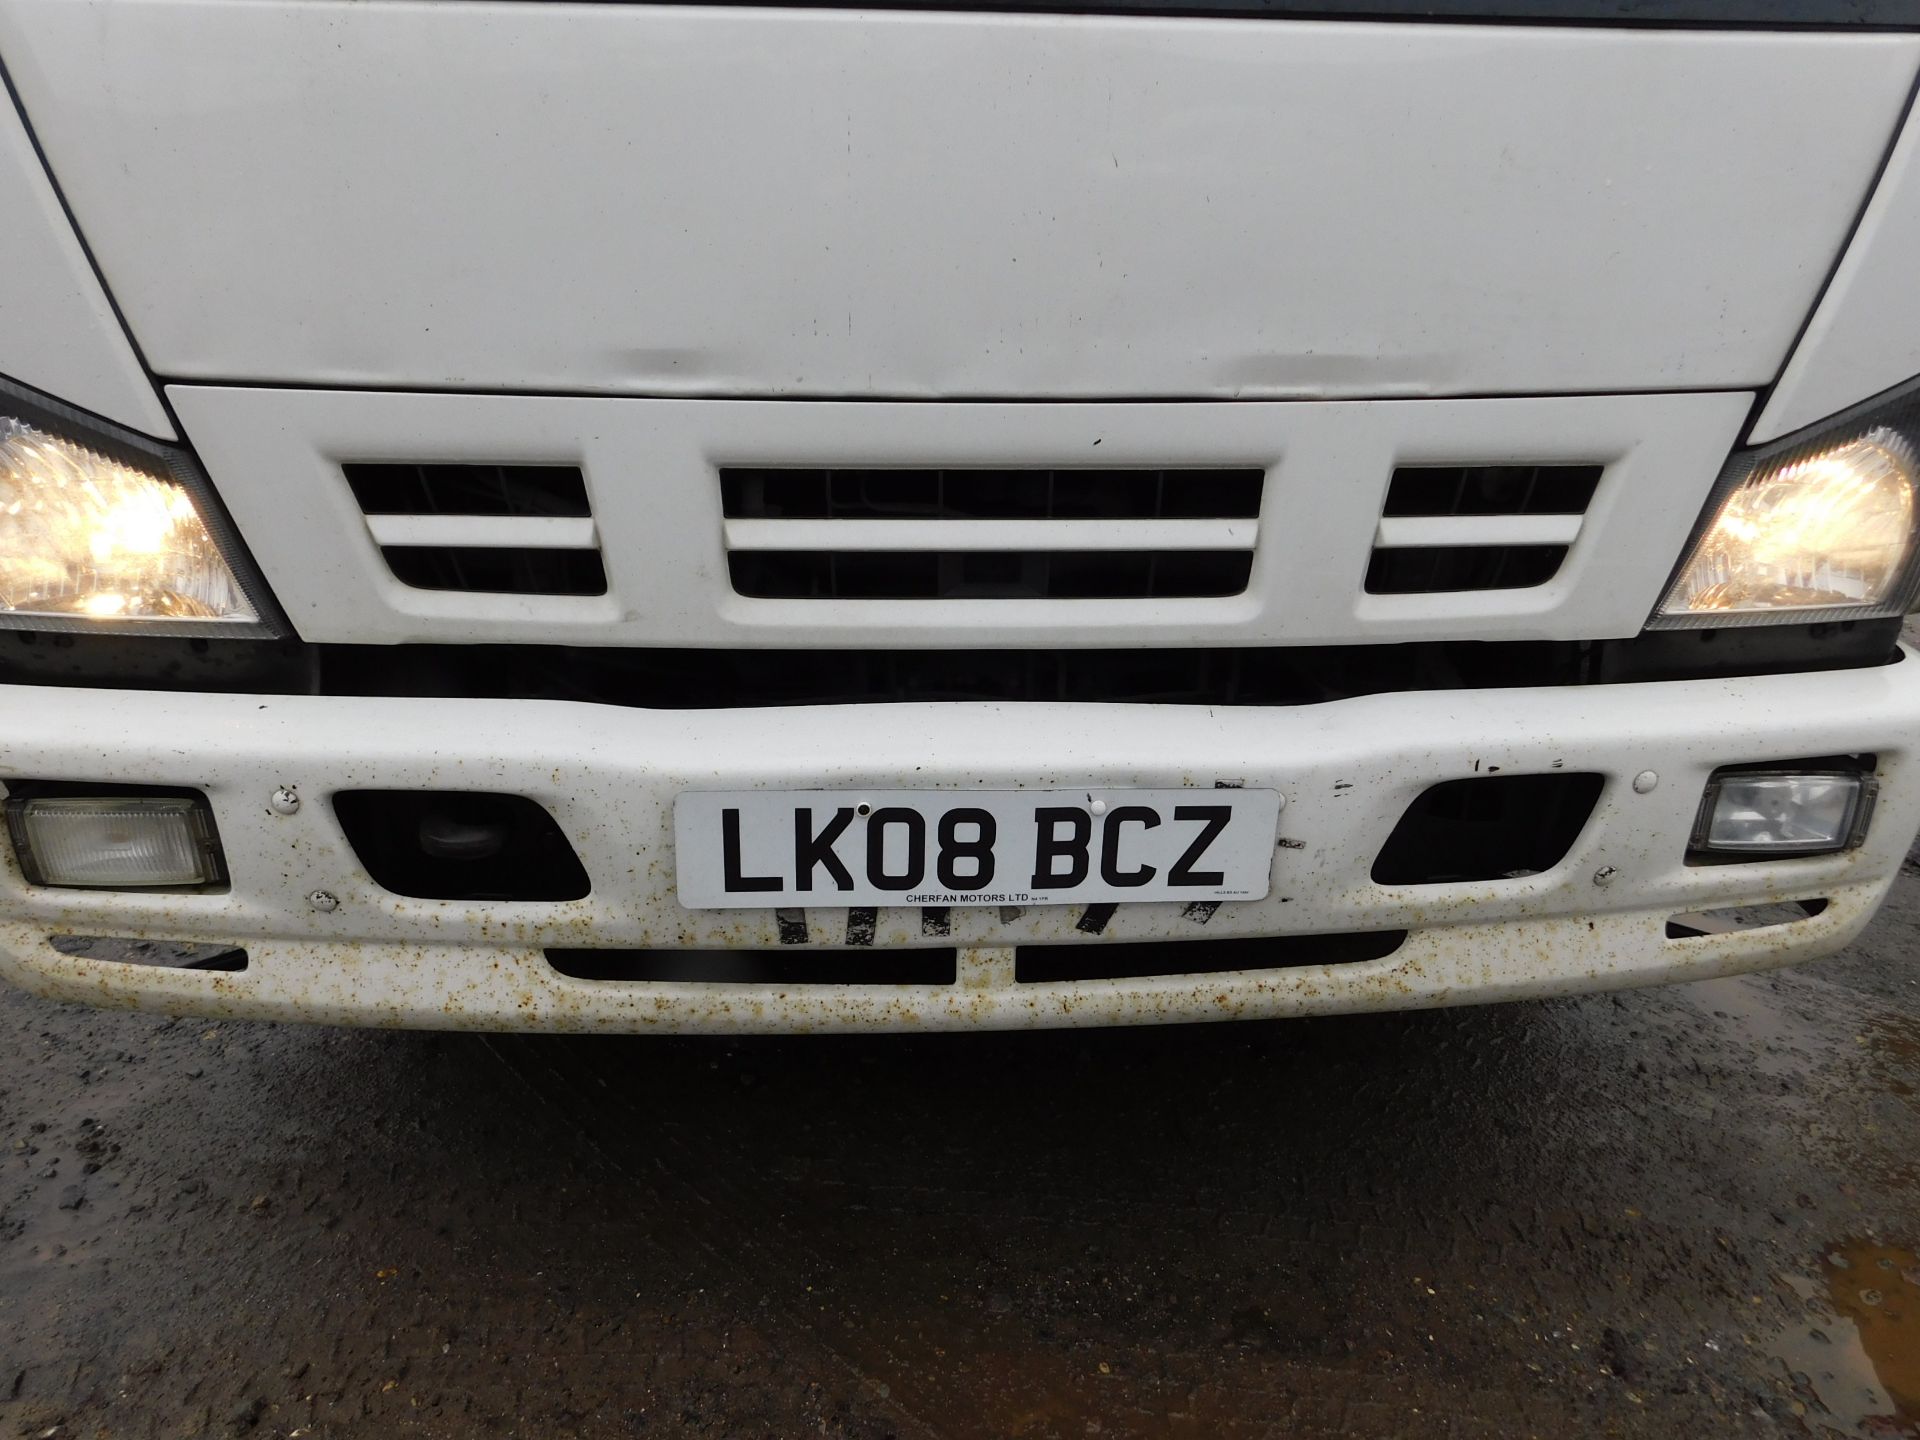 Isuzu NQR 70 Curtain Side 7.5Ton Auto Lorry – Registration LK08 BCZ, First Registered 4th March - Image 7 of 19